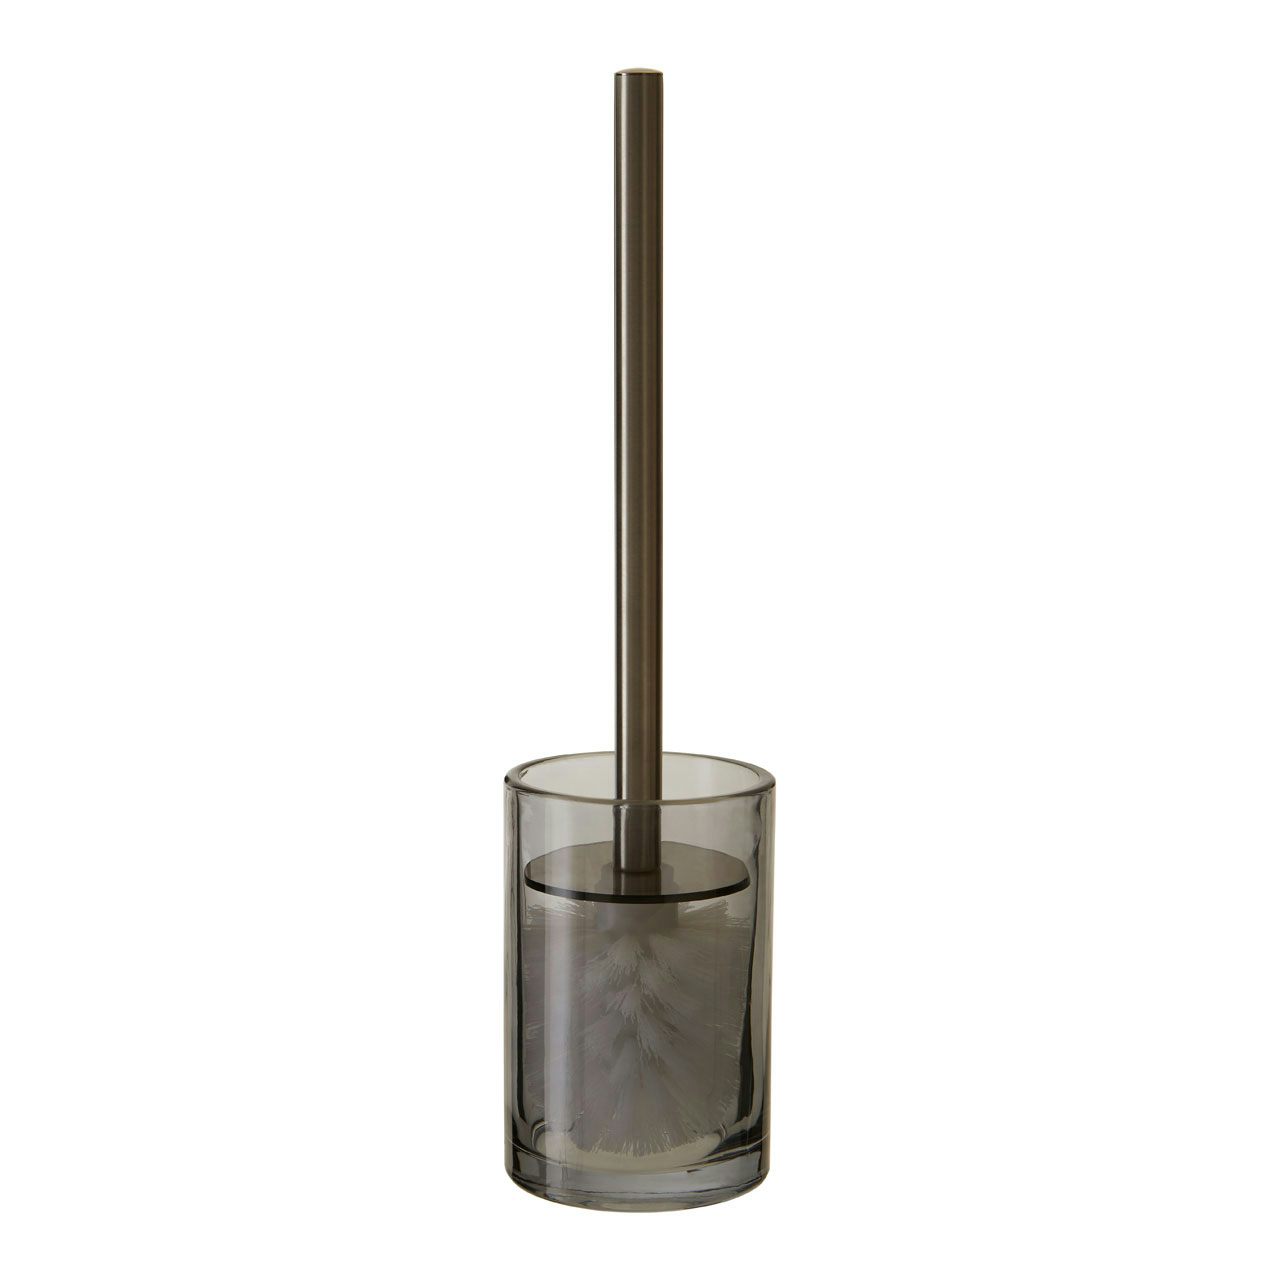 Accents Ridley grey glass toilet brush and holder